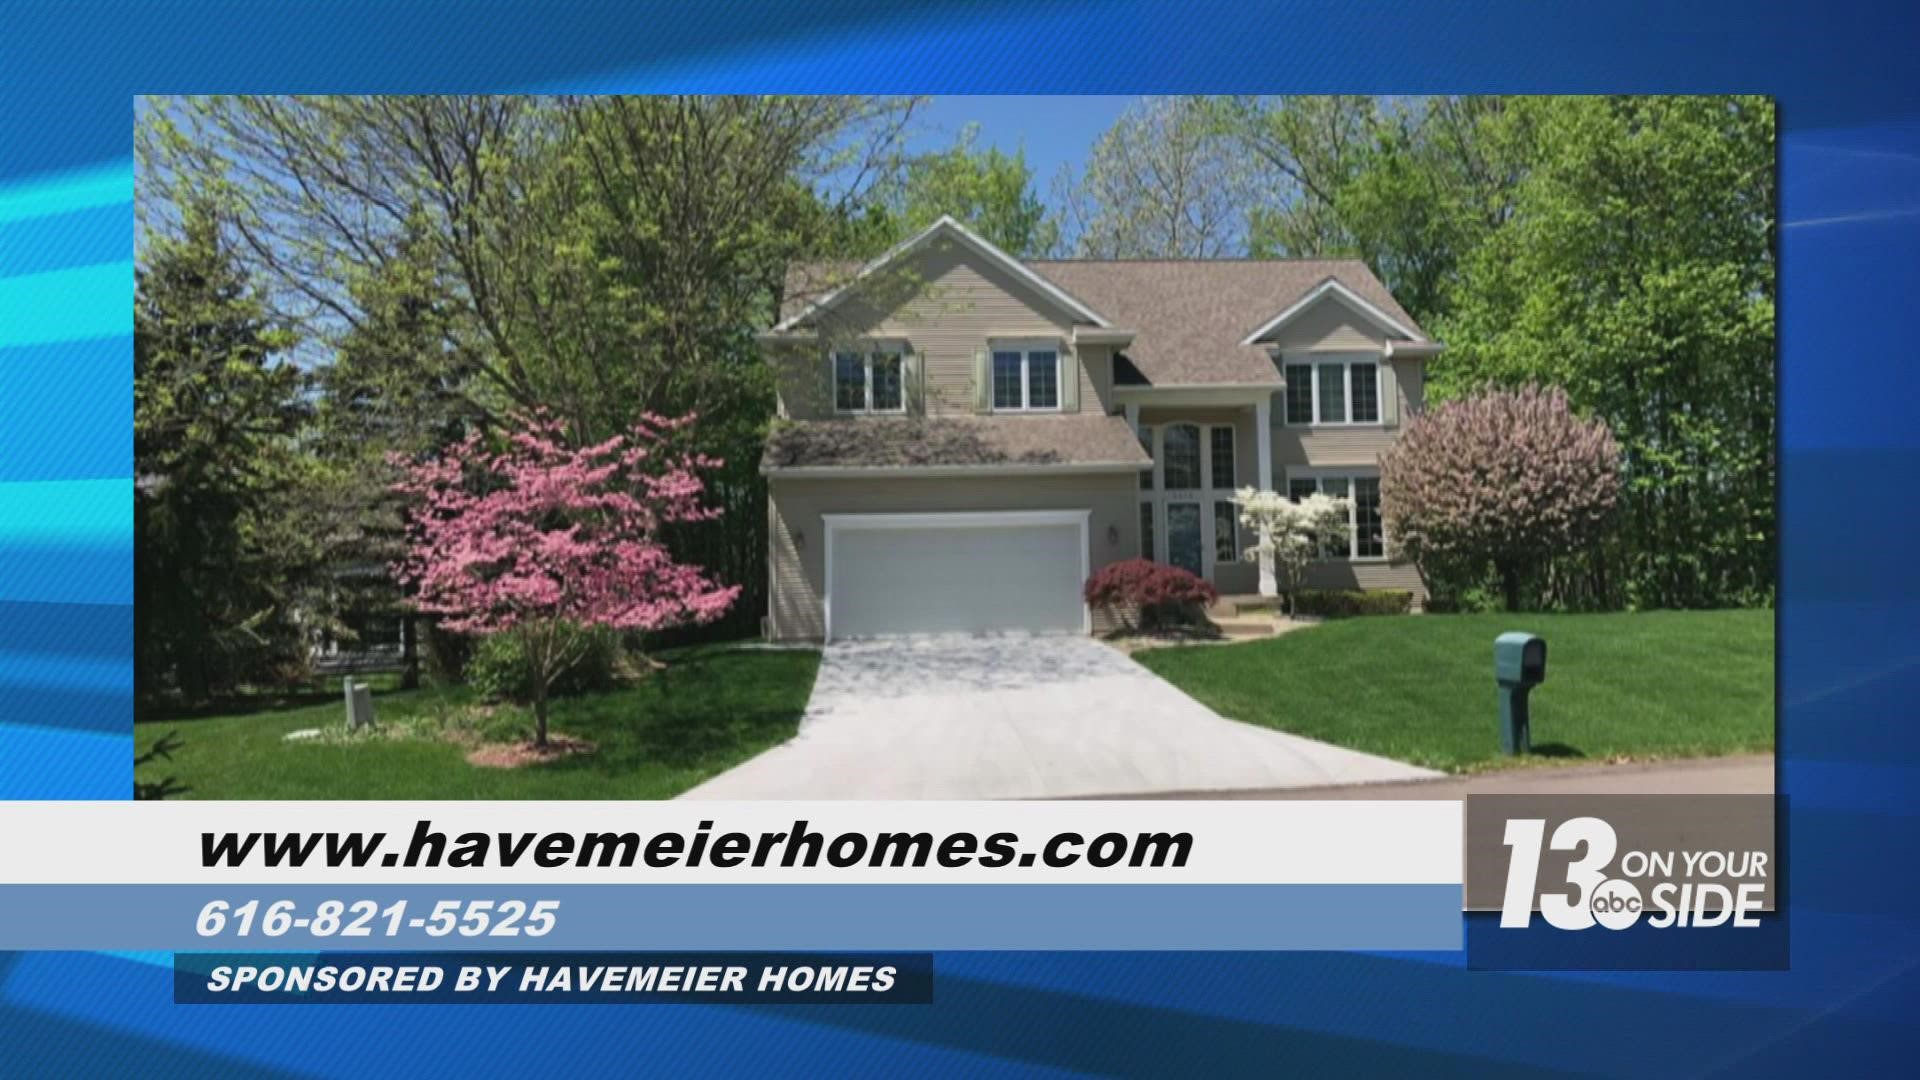 Kendra Havemeier joined us from Havemeier Homes to explain what all of this means for both buyers and sellers.